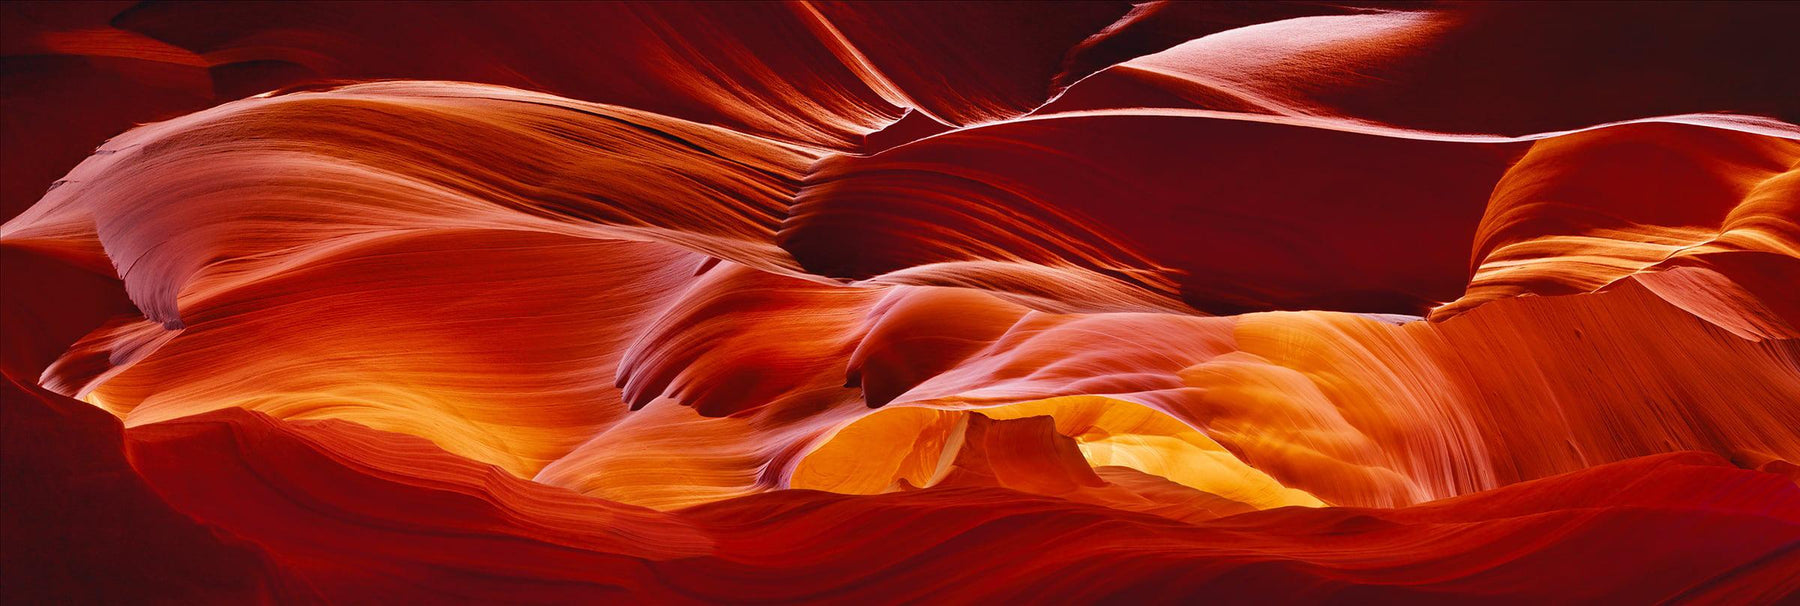 Red orange and yellow wave shaped sandstone walls of the slot canyons in Antelope Canyon Arizona